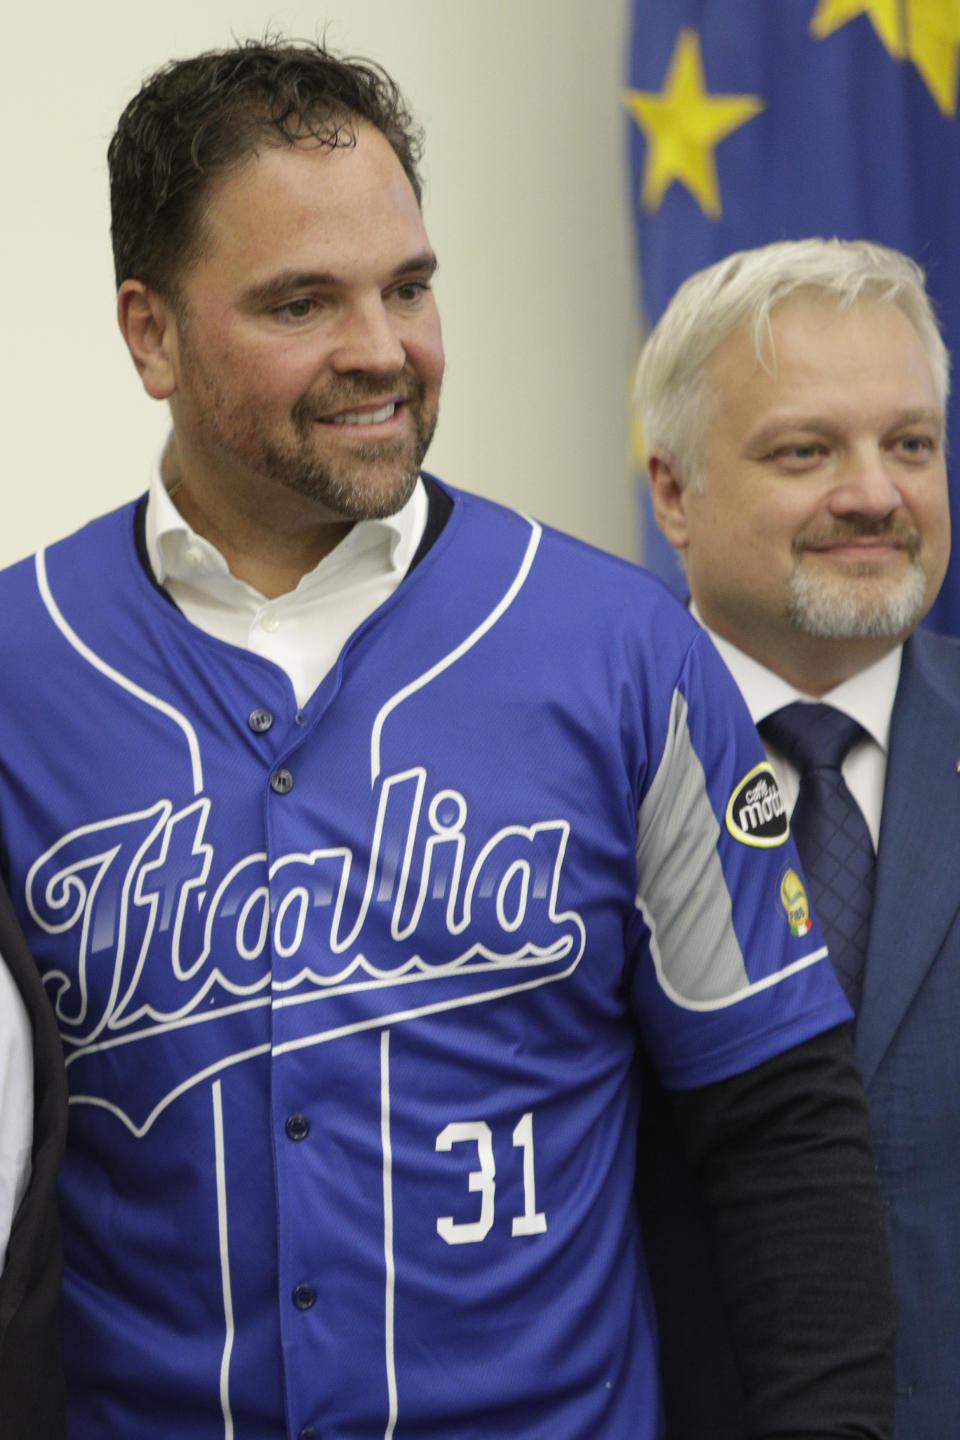 Hall of Fame catcher Mike Piazza shows his jersey during his presentation as Italy's national baseball team coach, at the Italian Olympic Committee headquarters in Rome, Friday, Nov. 29, 2019. At left is the President of the Italian Baseball Federation Andrea Marcon. (AP Photo/Alberto Pellaschiar)